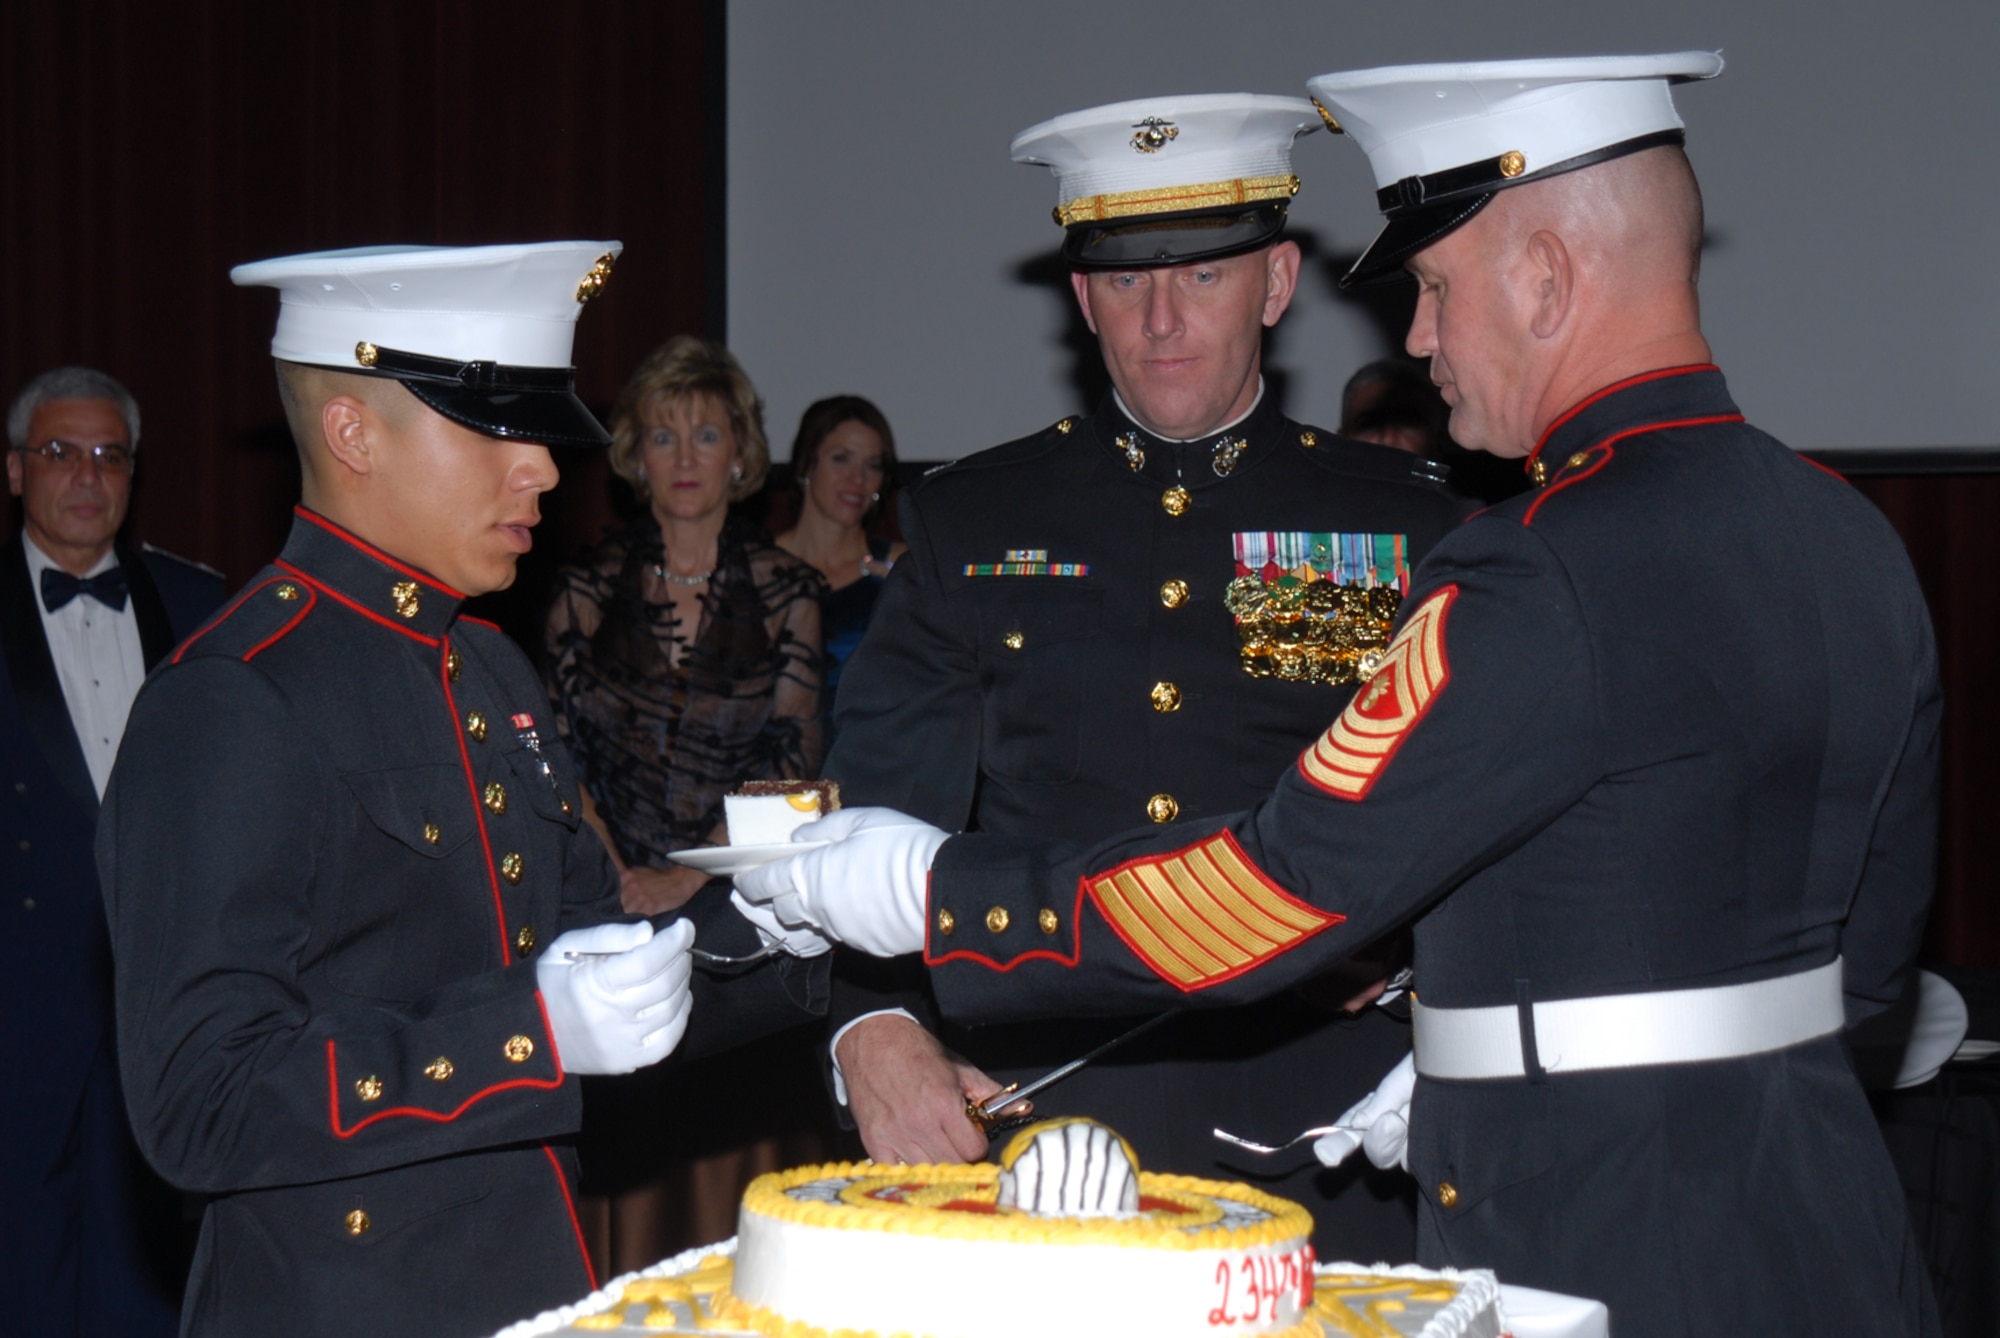 SAN ANGELO, Texas -- Marine Corps Master Gunnery Sgt. Peter Bordeleau, hands the second piece of cake to Marine Corps Pvt. A. H. Peralta at the 234th Marine Corps Birthday Ball hosted by the Marine Corps Detachment, Goodfellow Air Force Base, Nov. 7, 2009. The first piece of cake is given to the guest of honor, the second to the oldest Marine present. Upon receiving the second piece of cake, the oldest Marine will in turn pass it on to the youngest Marine present, signifying the passing of experience and knowledge from the old to the young of the Corps. (U.S. Air Force photo/Staff Sgt. Laura R. McFarlane)
